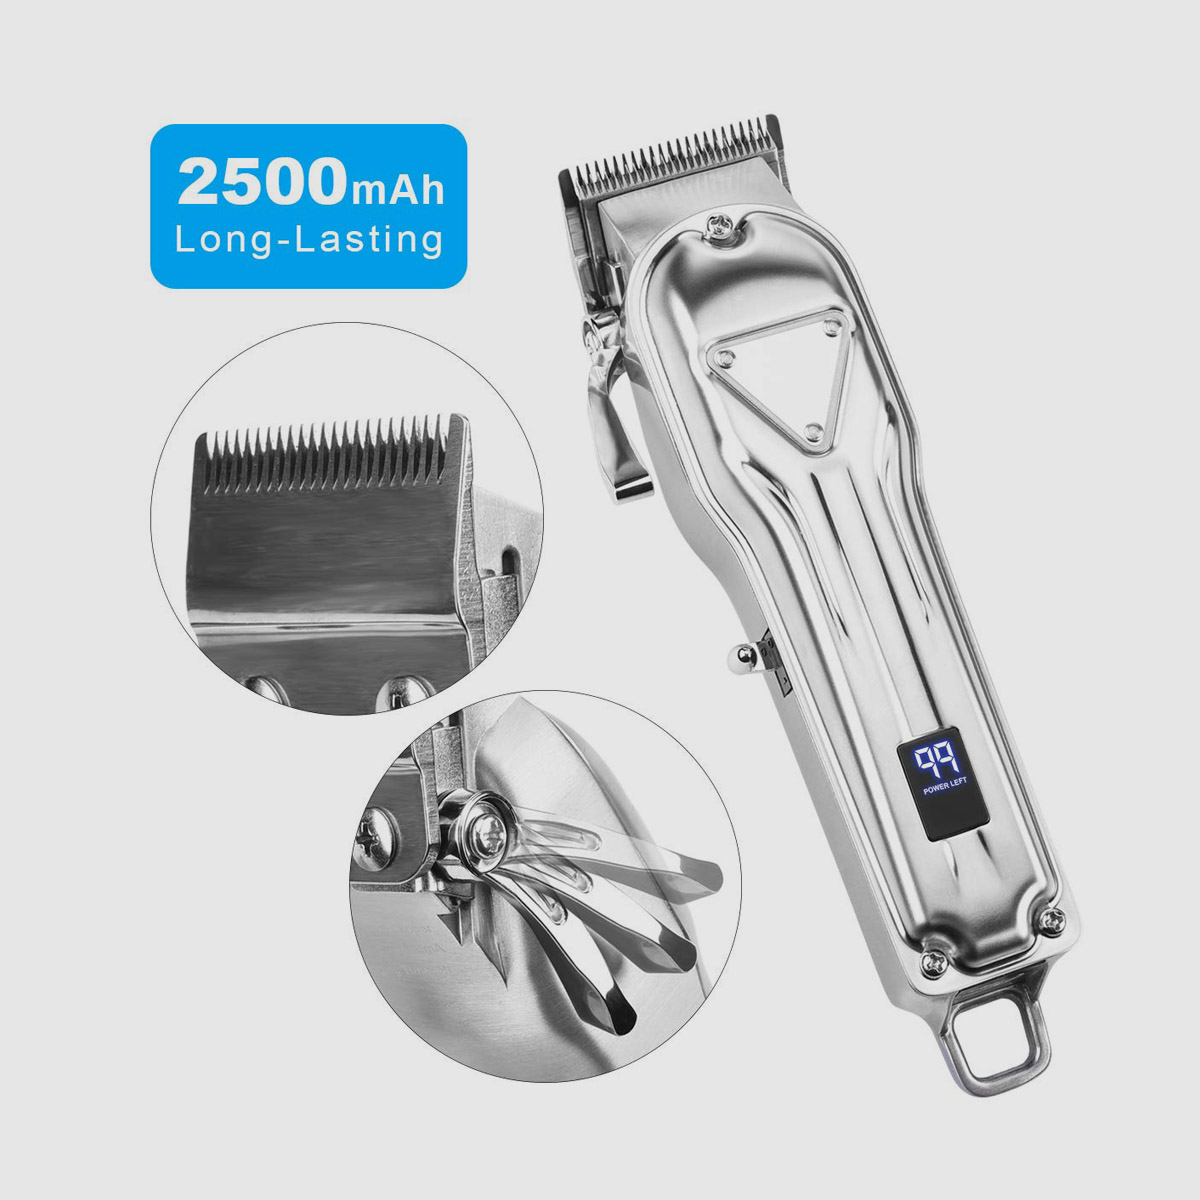 Pro Cordless Hair Clippers for Men Stylists Barbers Kids Home Using - 2